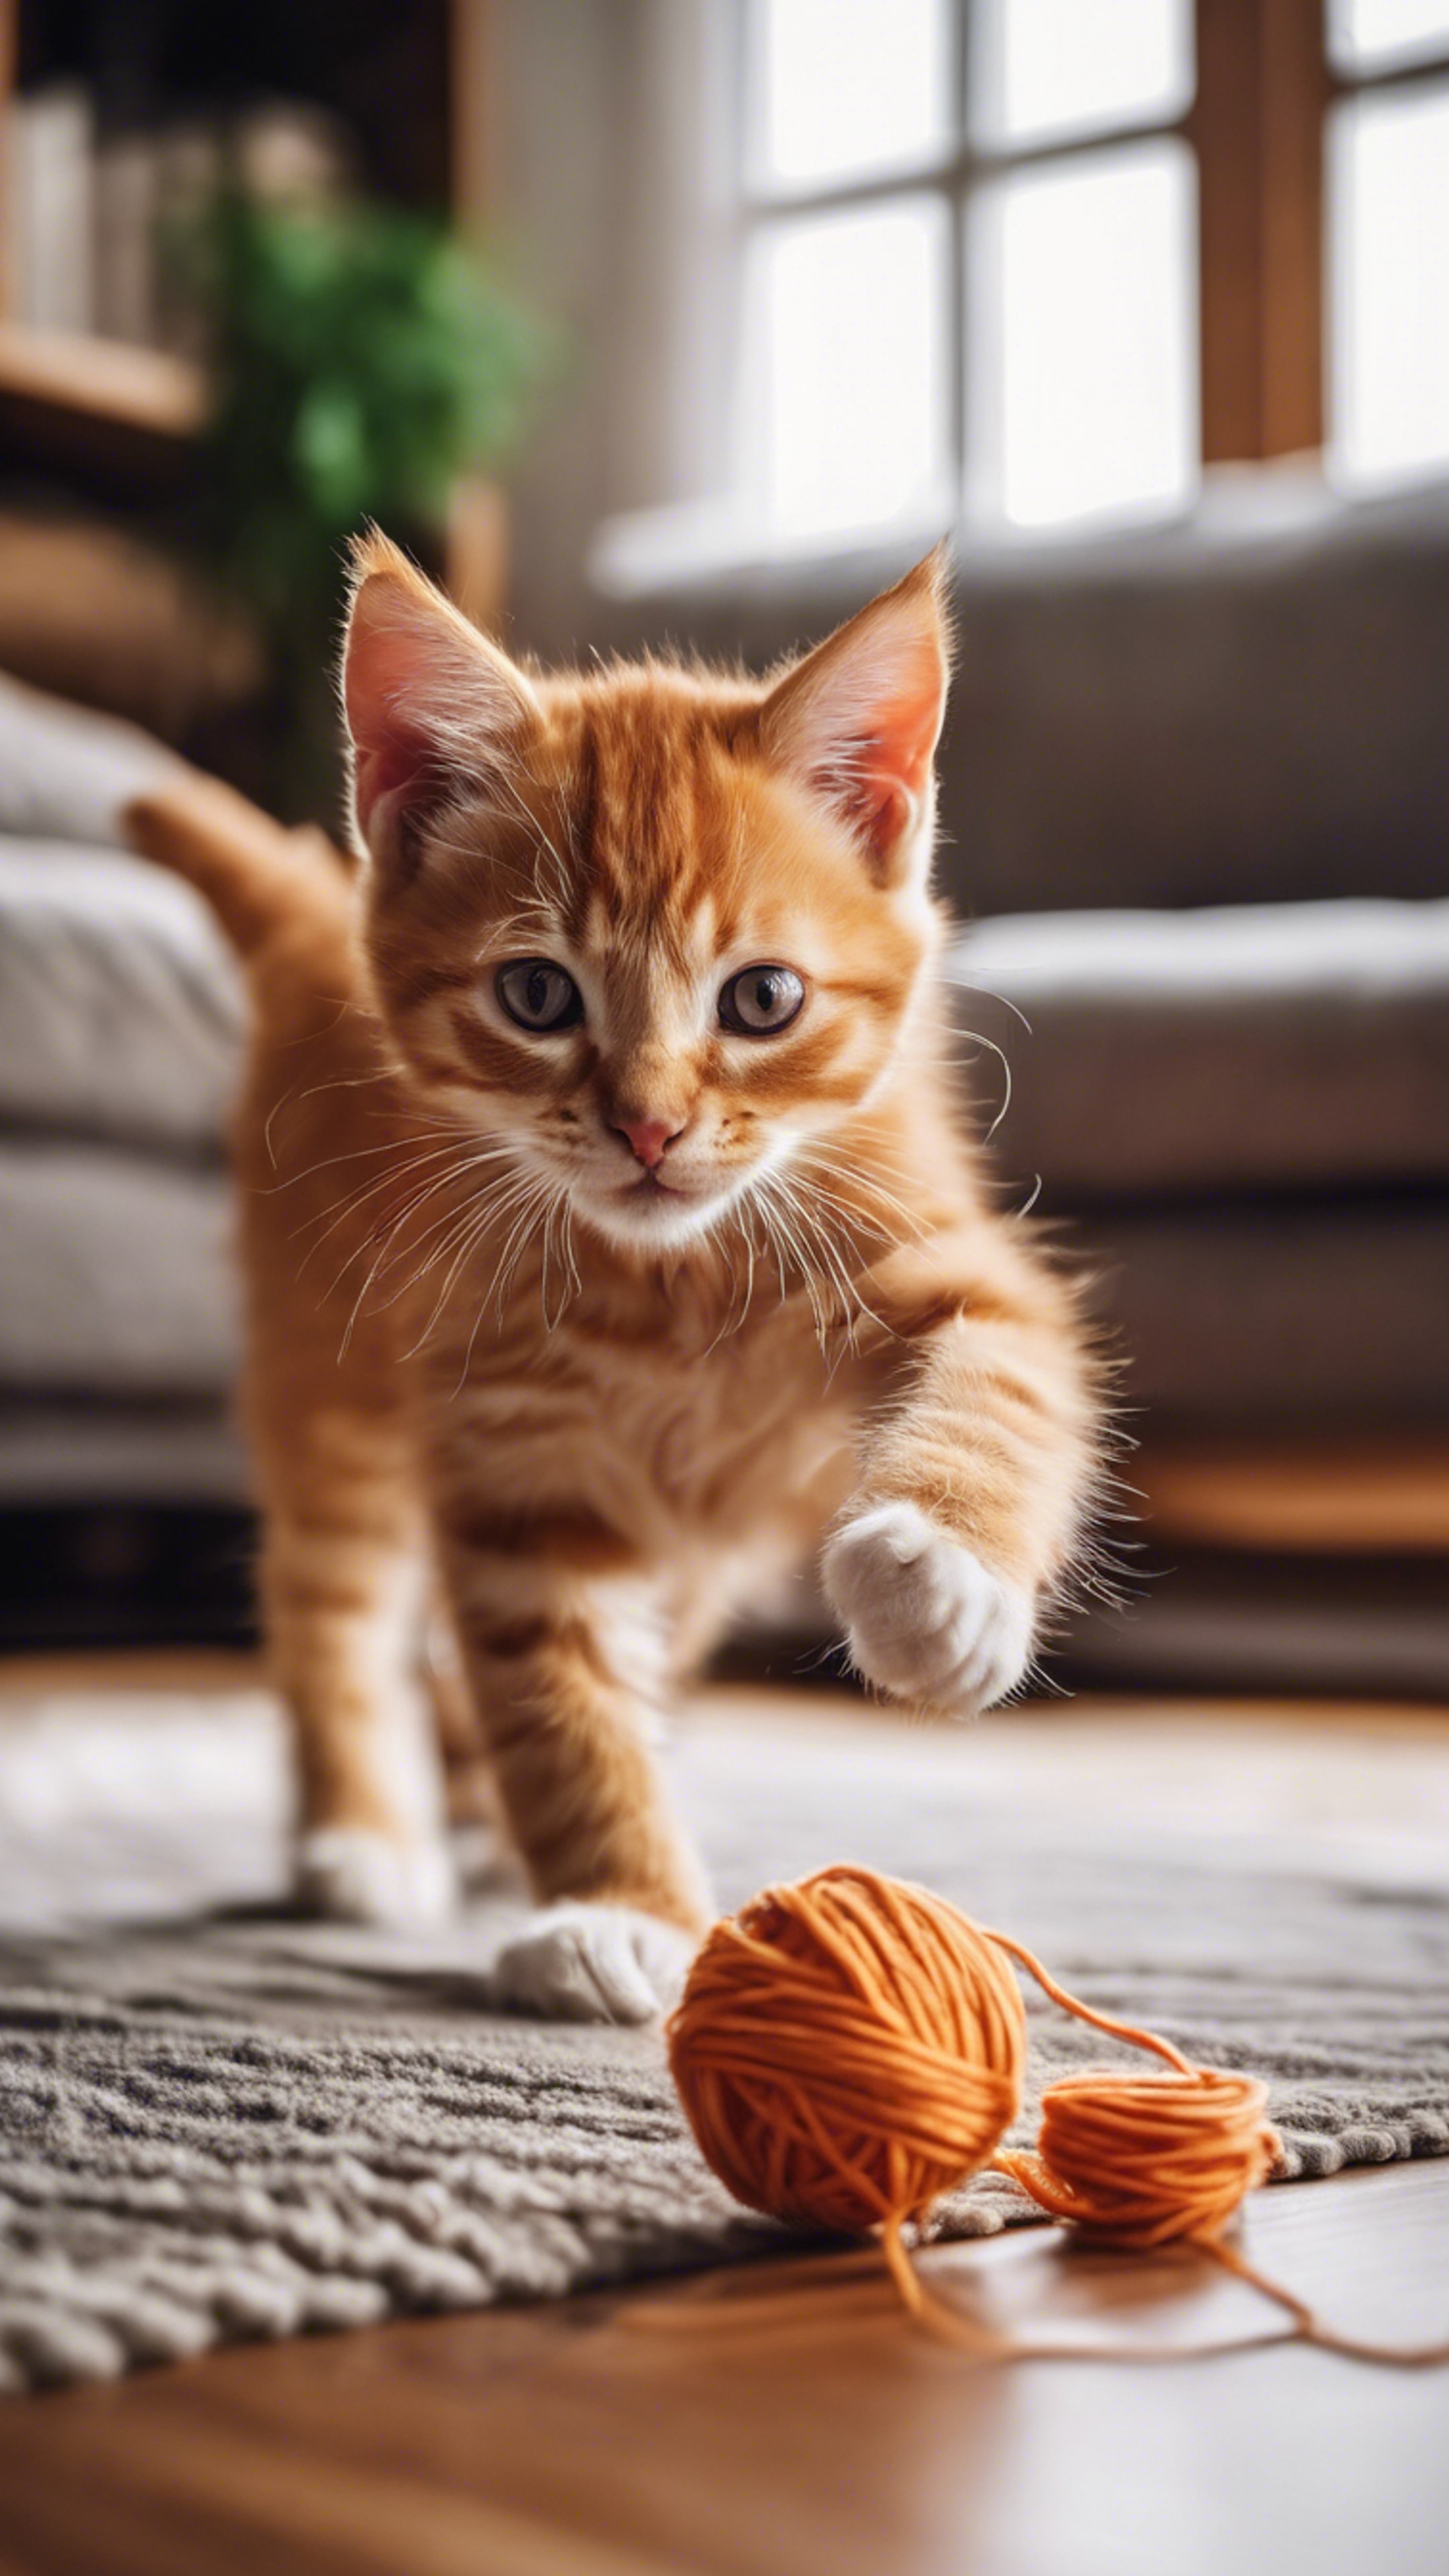 A playful orange tabby kitten, chasing a ball of yarn in a cozy wooden living room. 墙纸[48ba56b3f1554d3caaed]